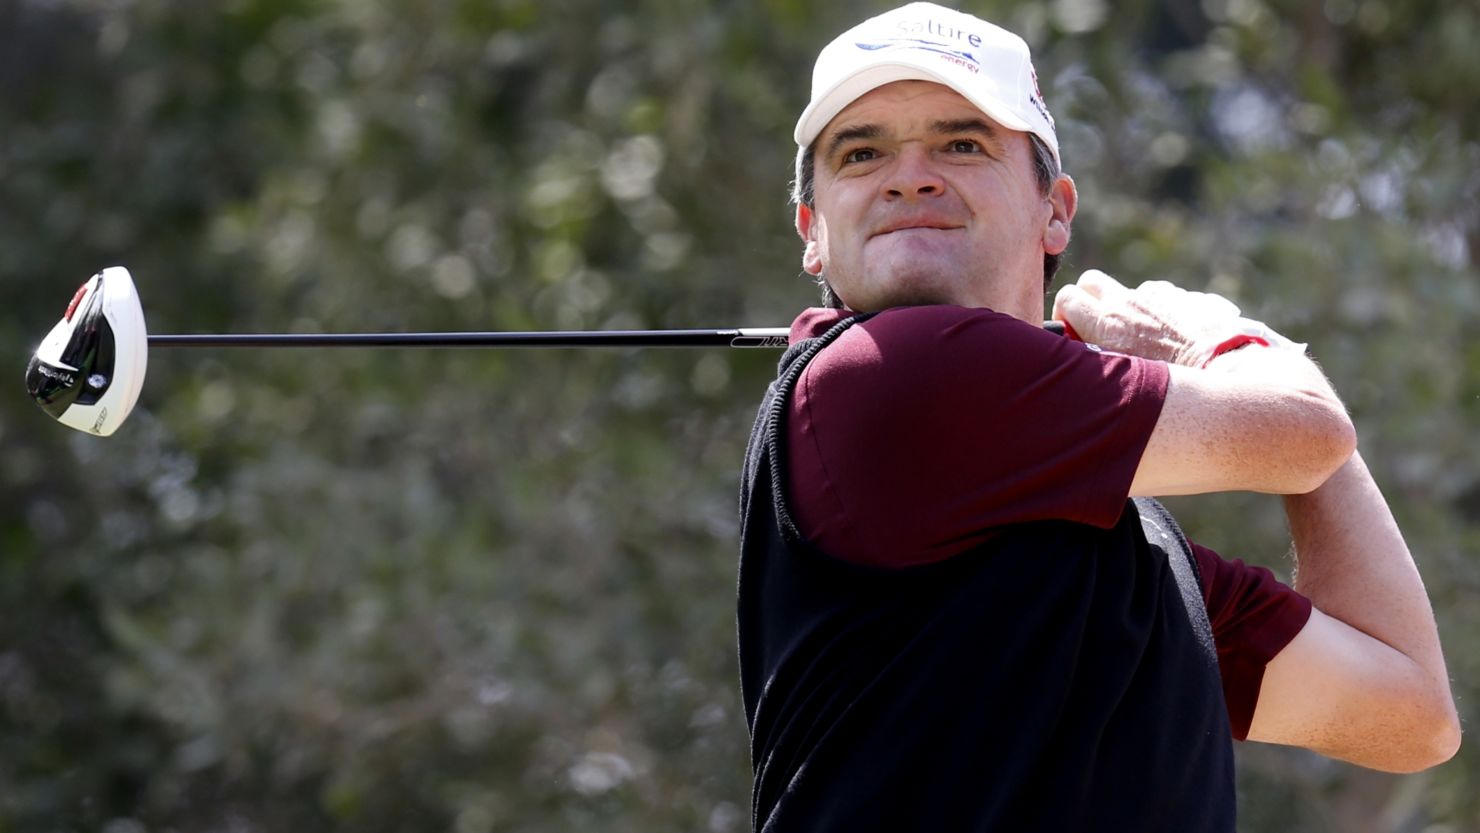 Things are looking up for Scotland's Paul Lawrie after a second-round 67 secured the lead at the Qatar Masters in Doha.